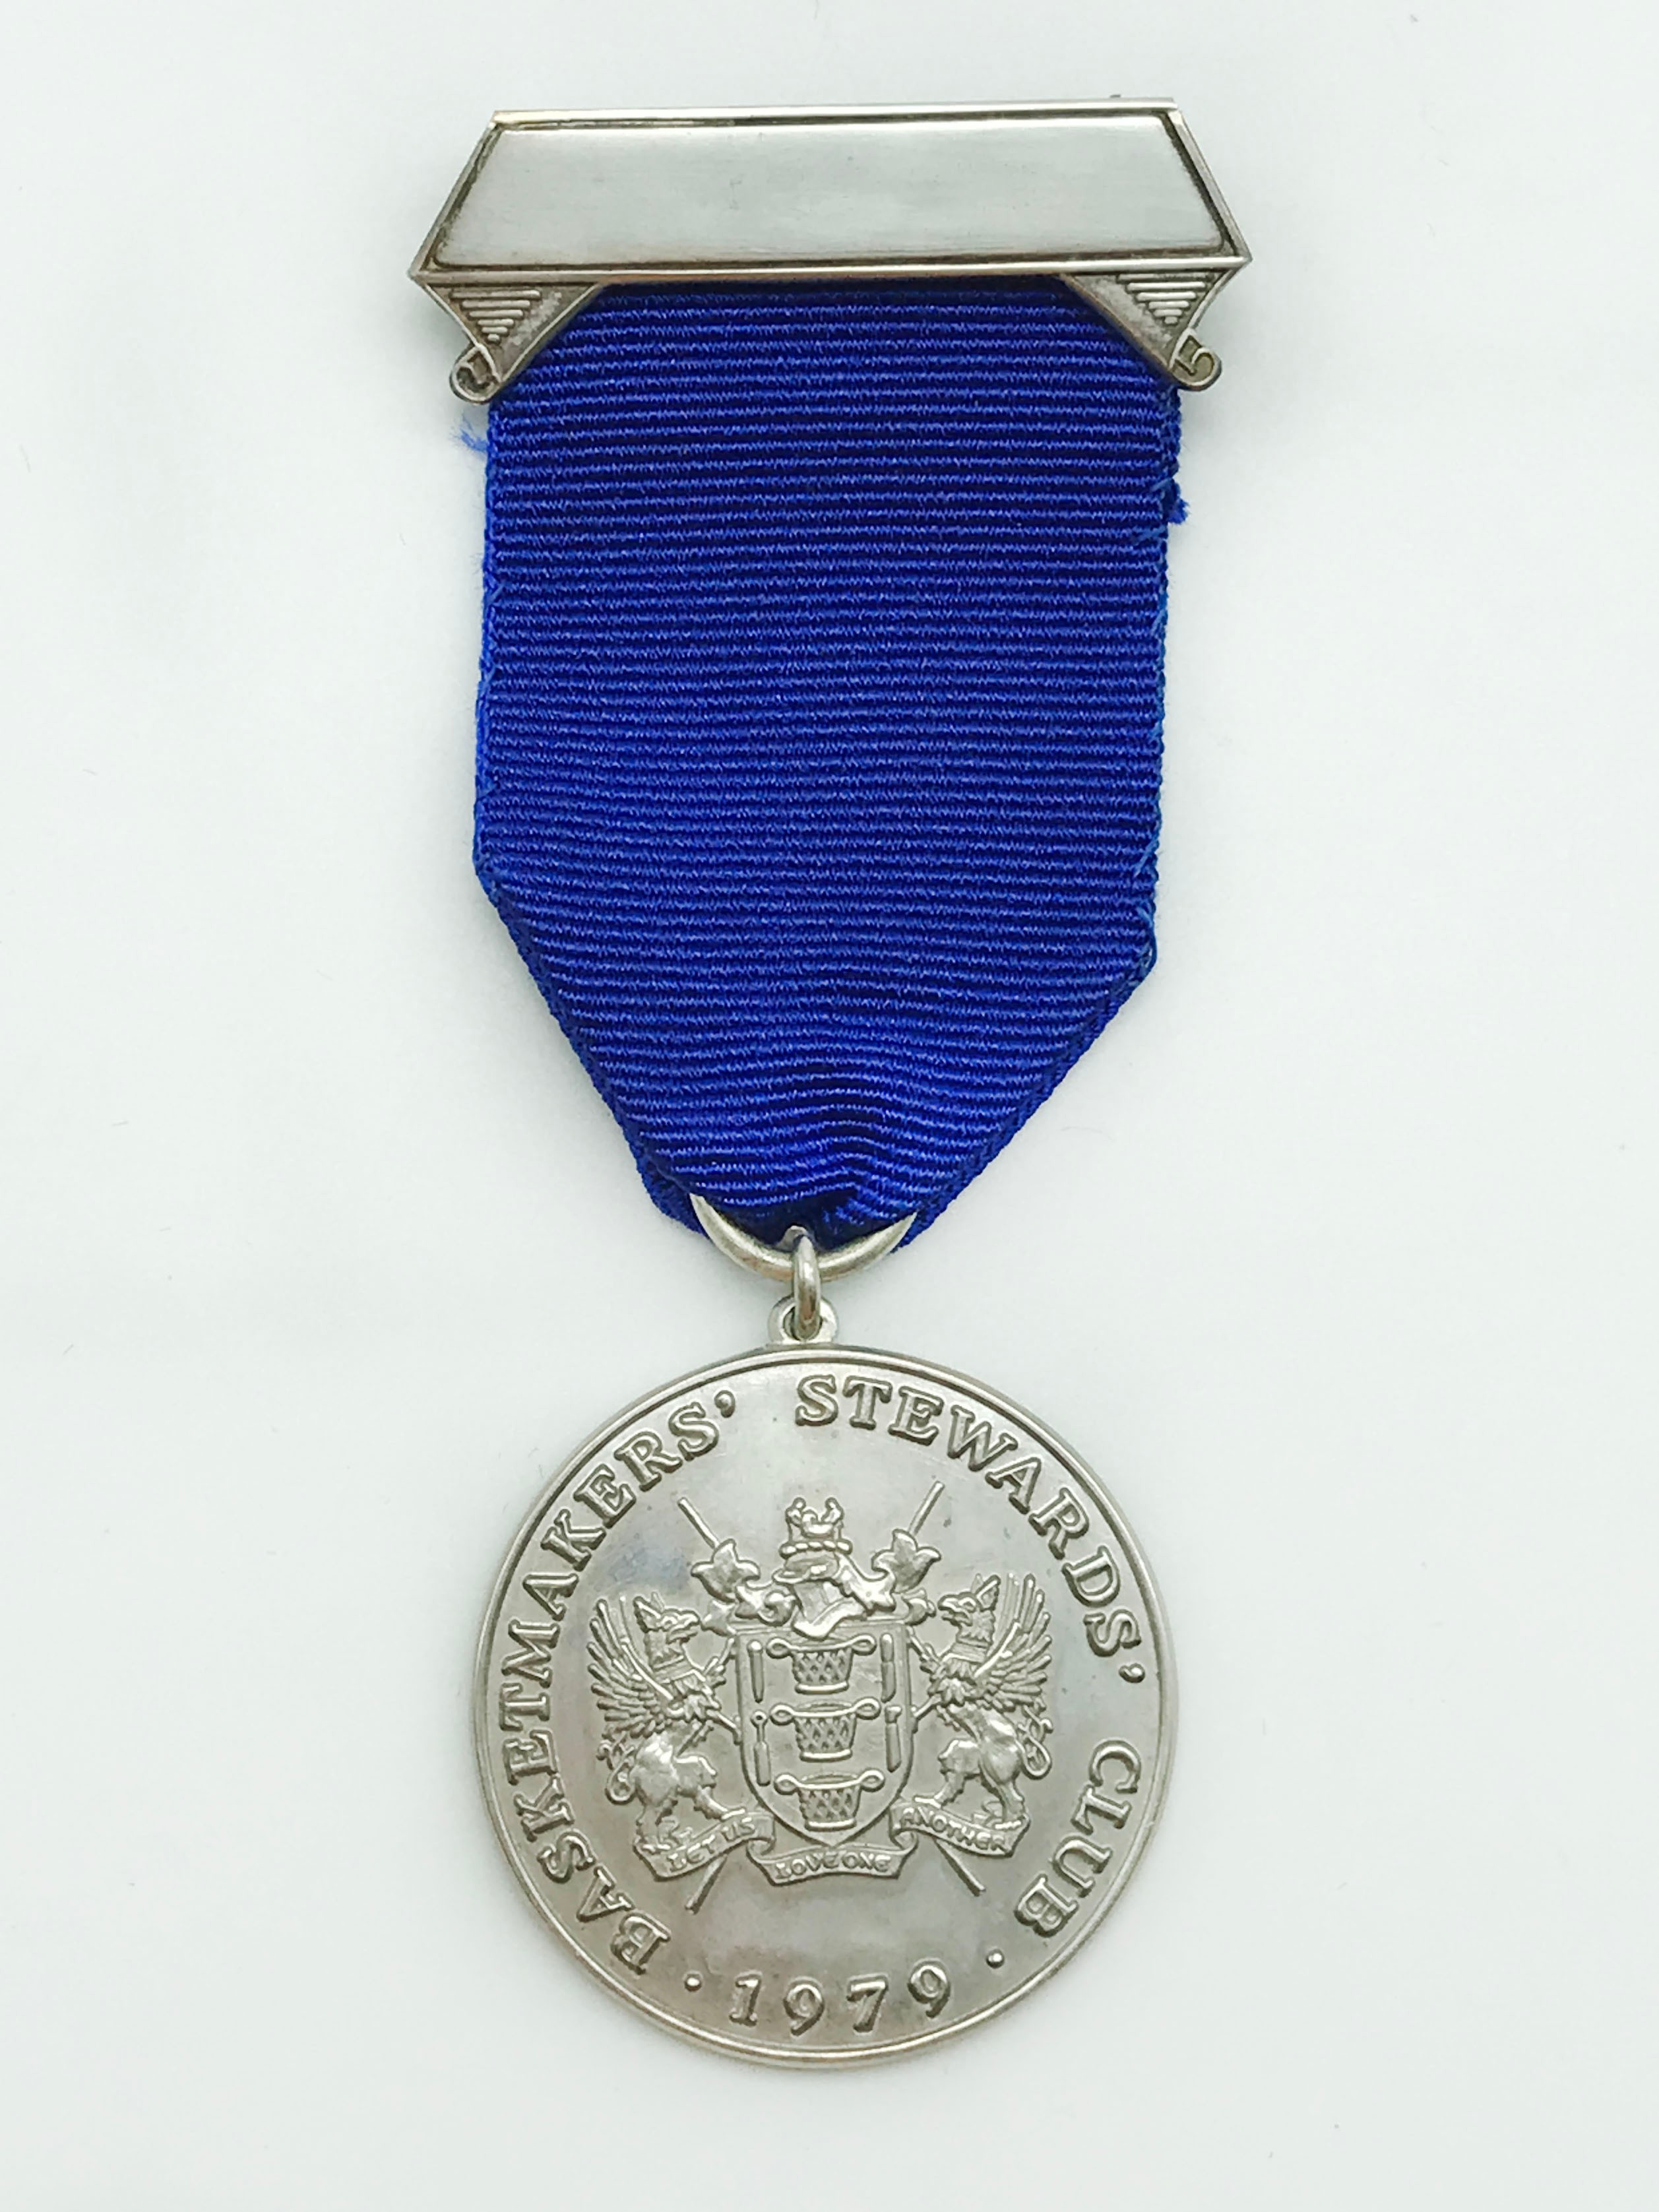 HALLMARKED SILVER MEDAL FOR THE WORSHIPFUL COMPANY OF BASKETMAKERS STEWARDS CLUB